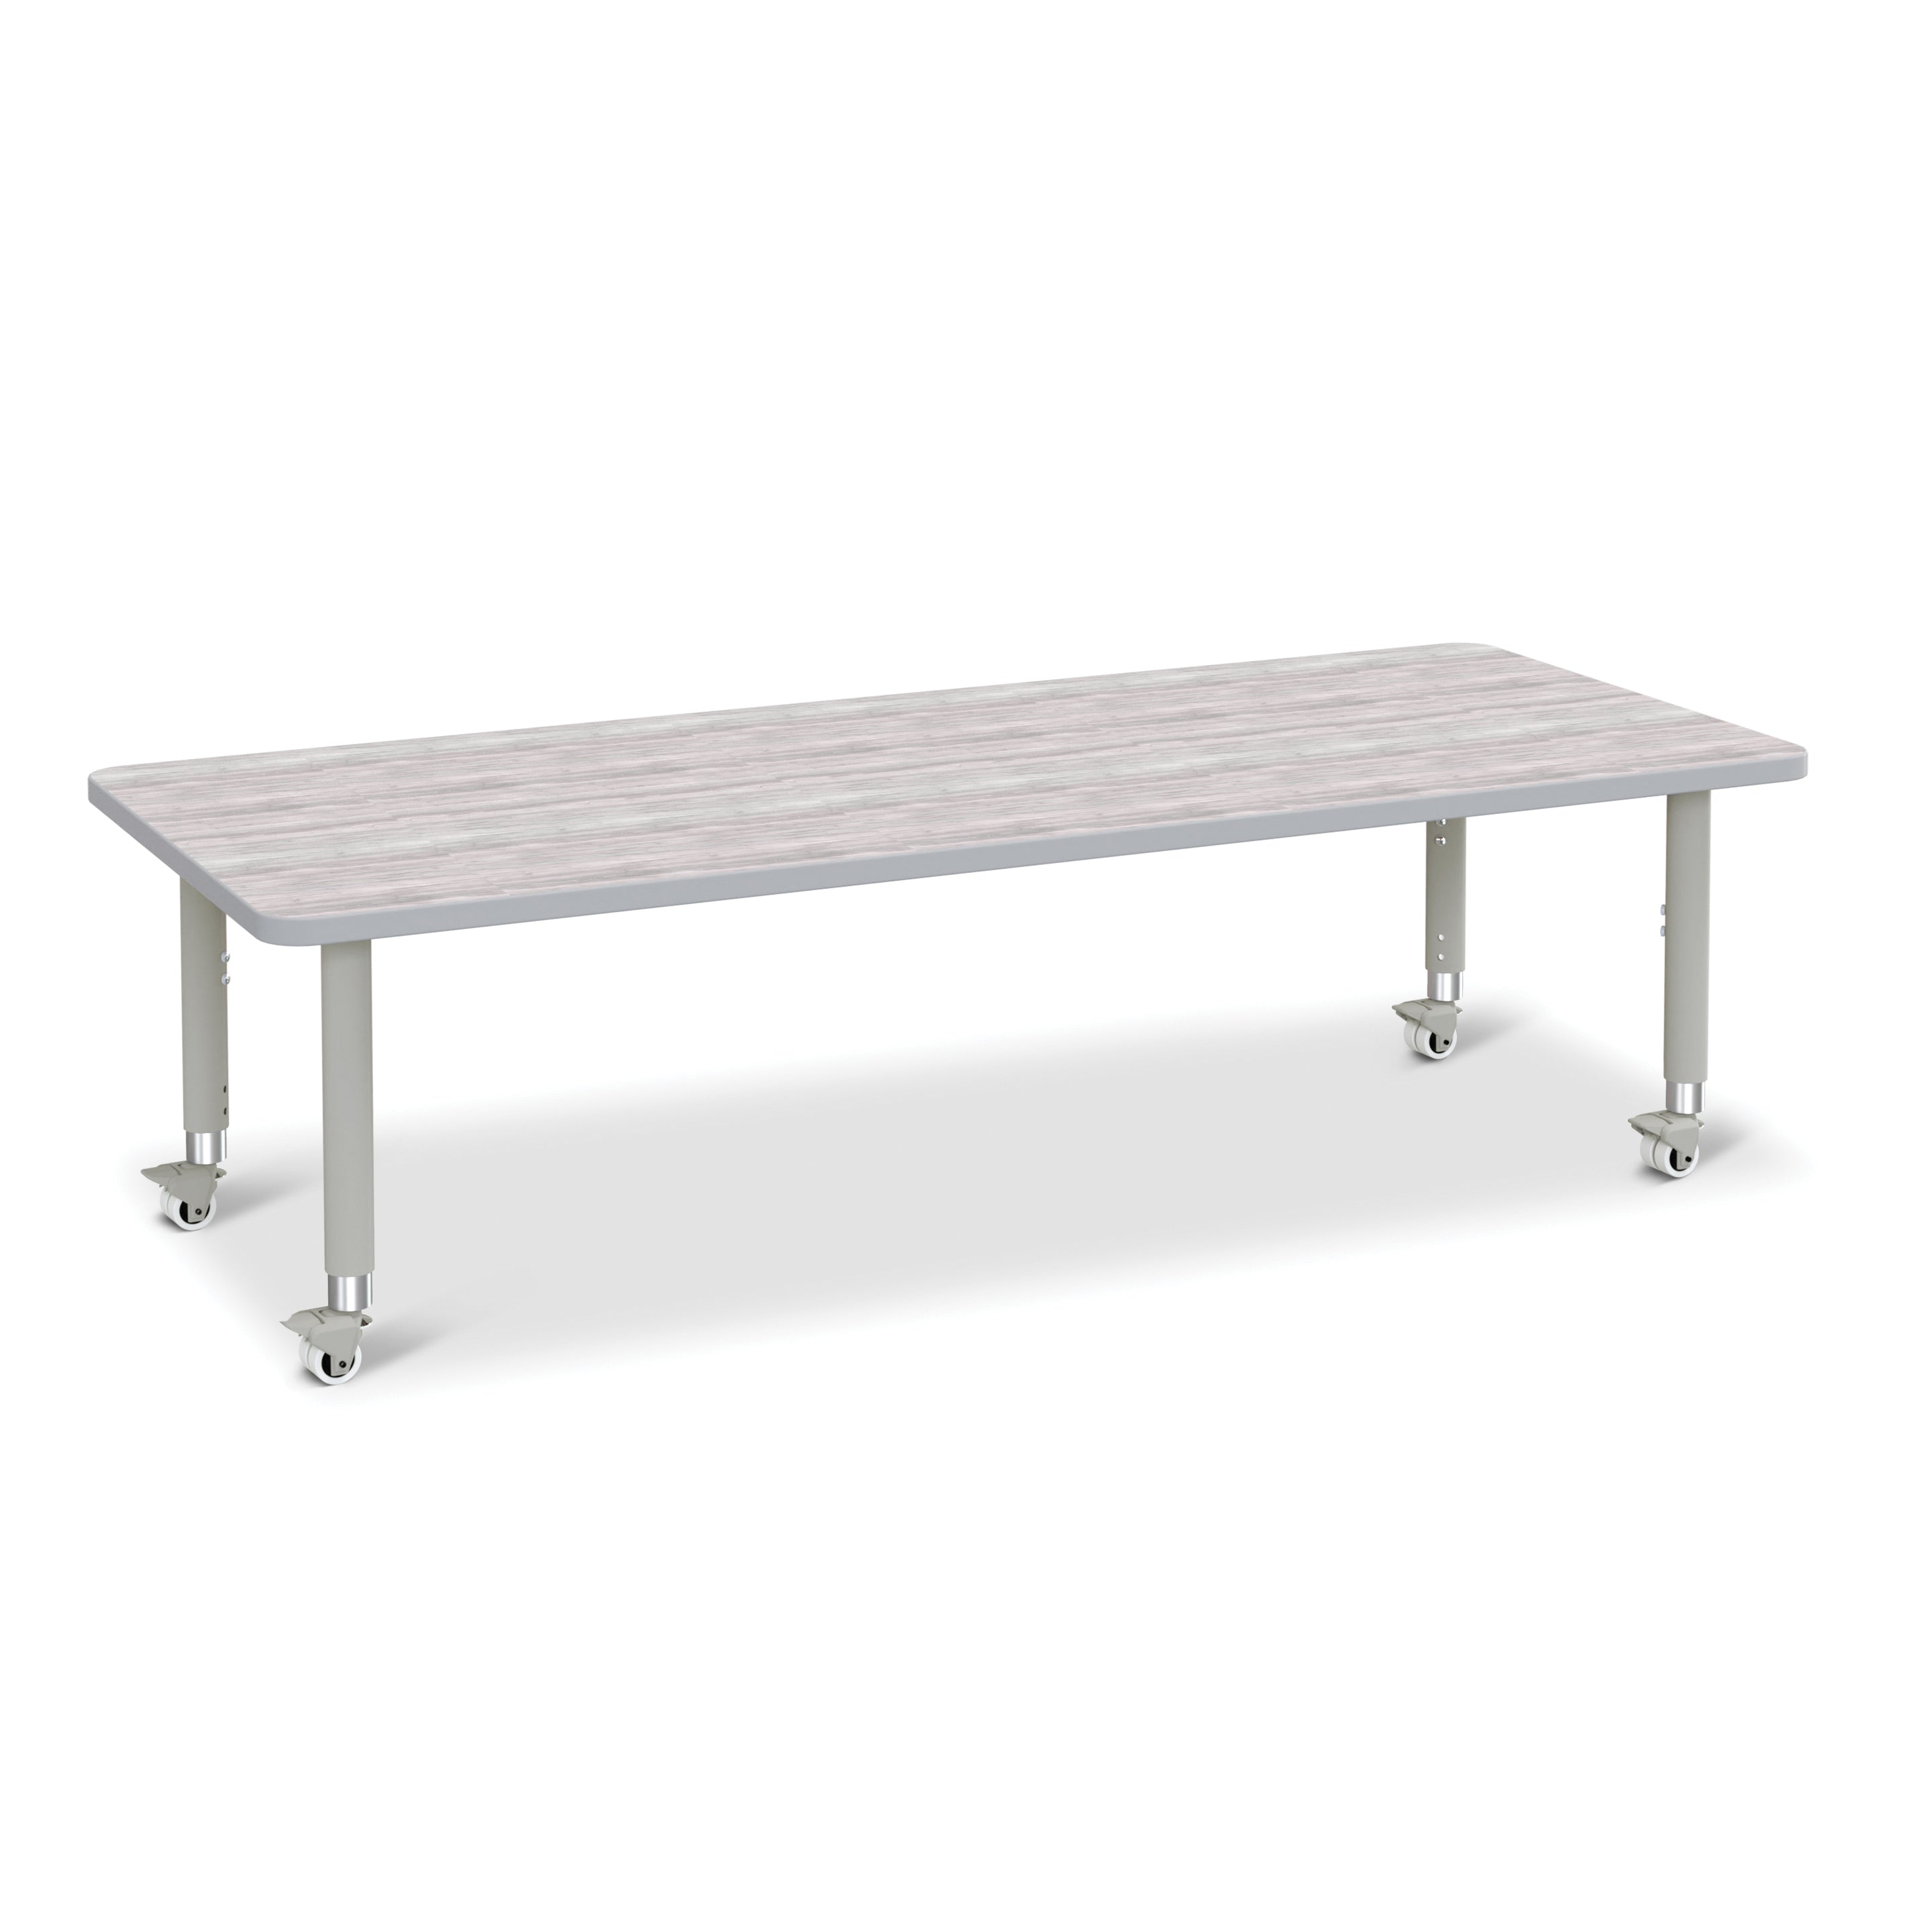 6413JCM450, Berries Rectangle Activity Table - 30" X 72", Mobile - Driftwood Gray/Gray/Gray